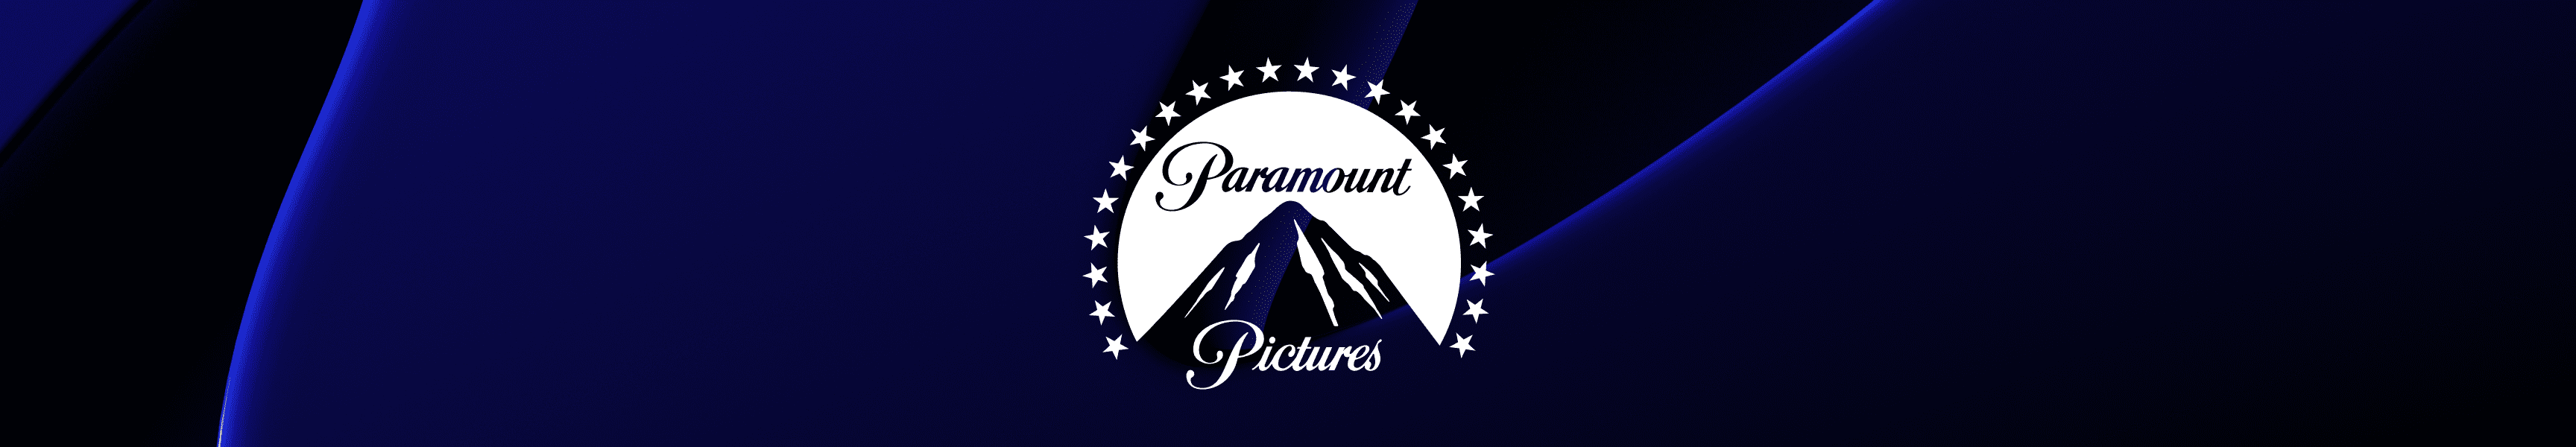 Paramount Pictures Becher